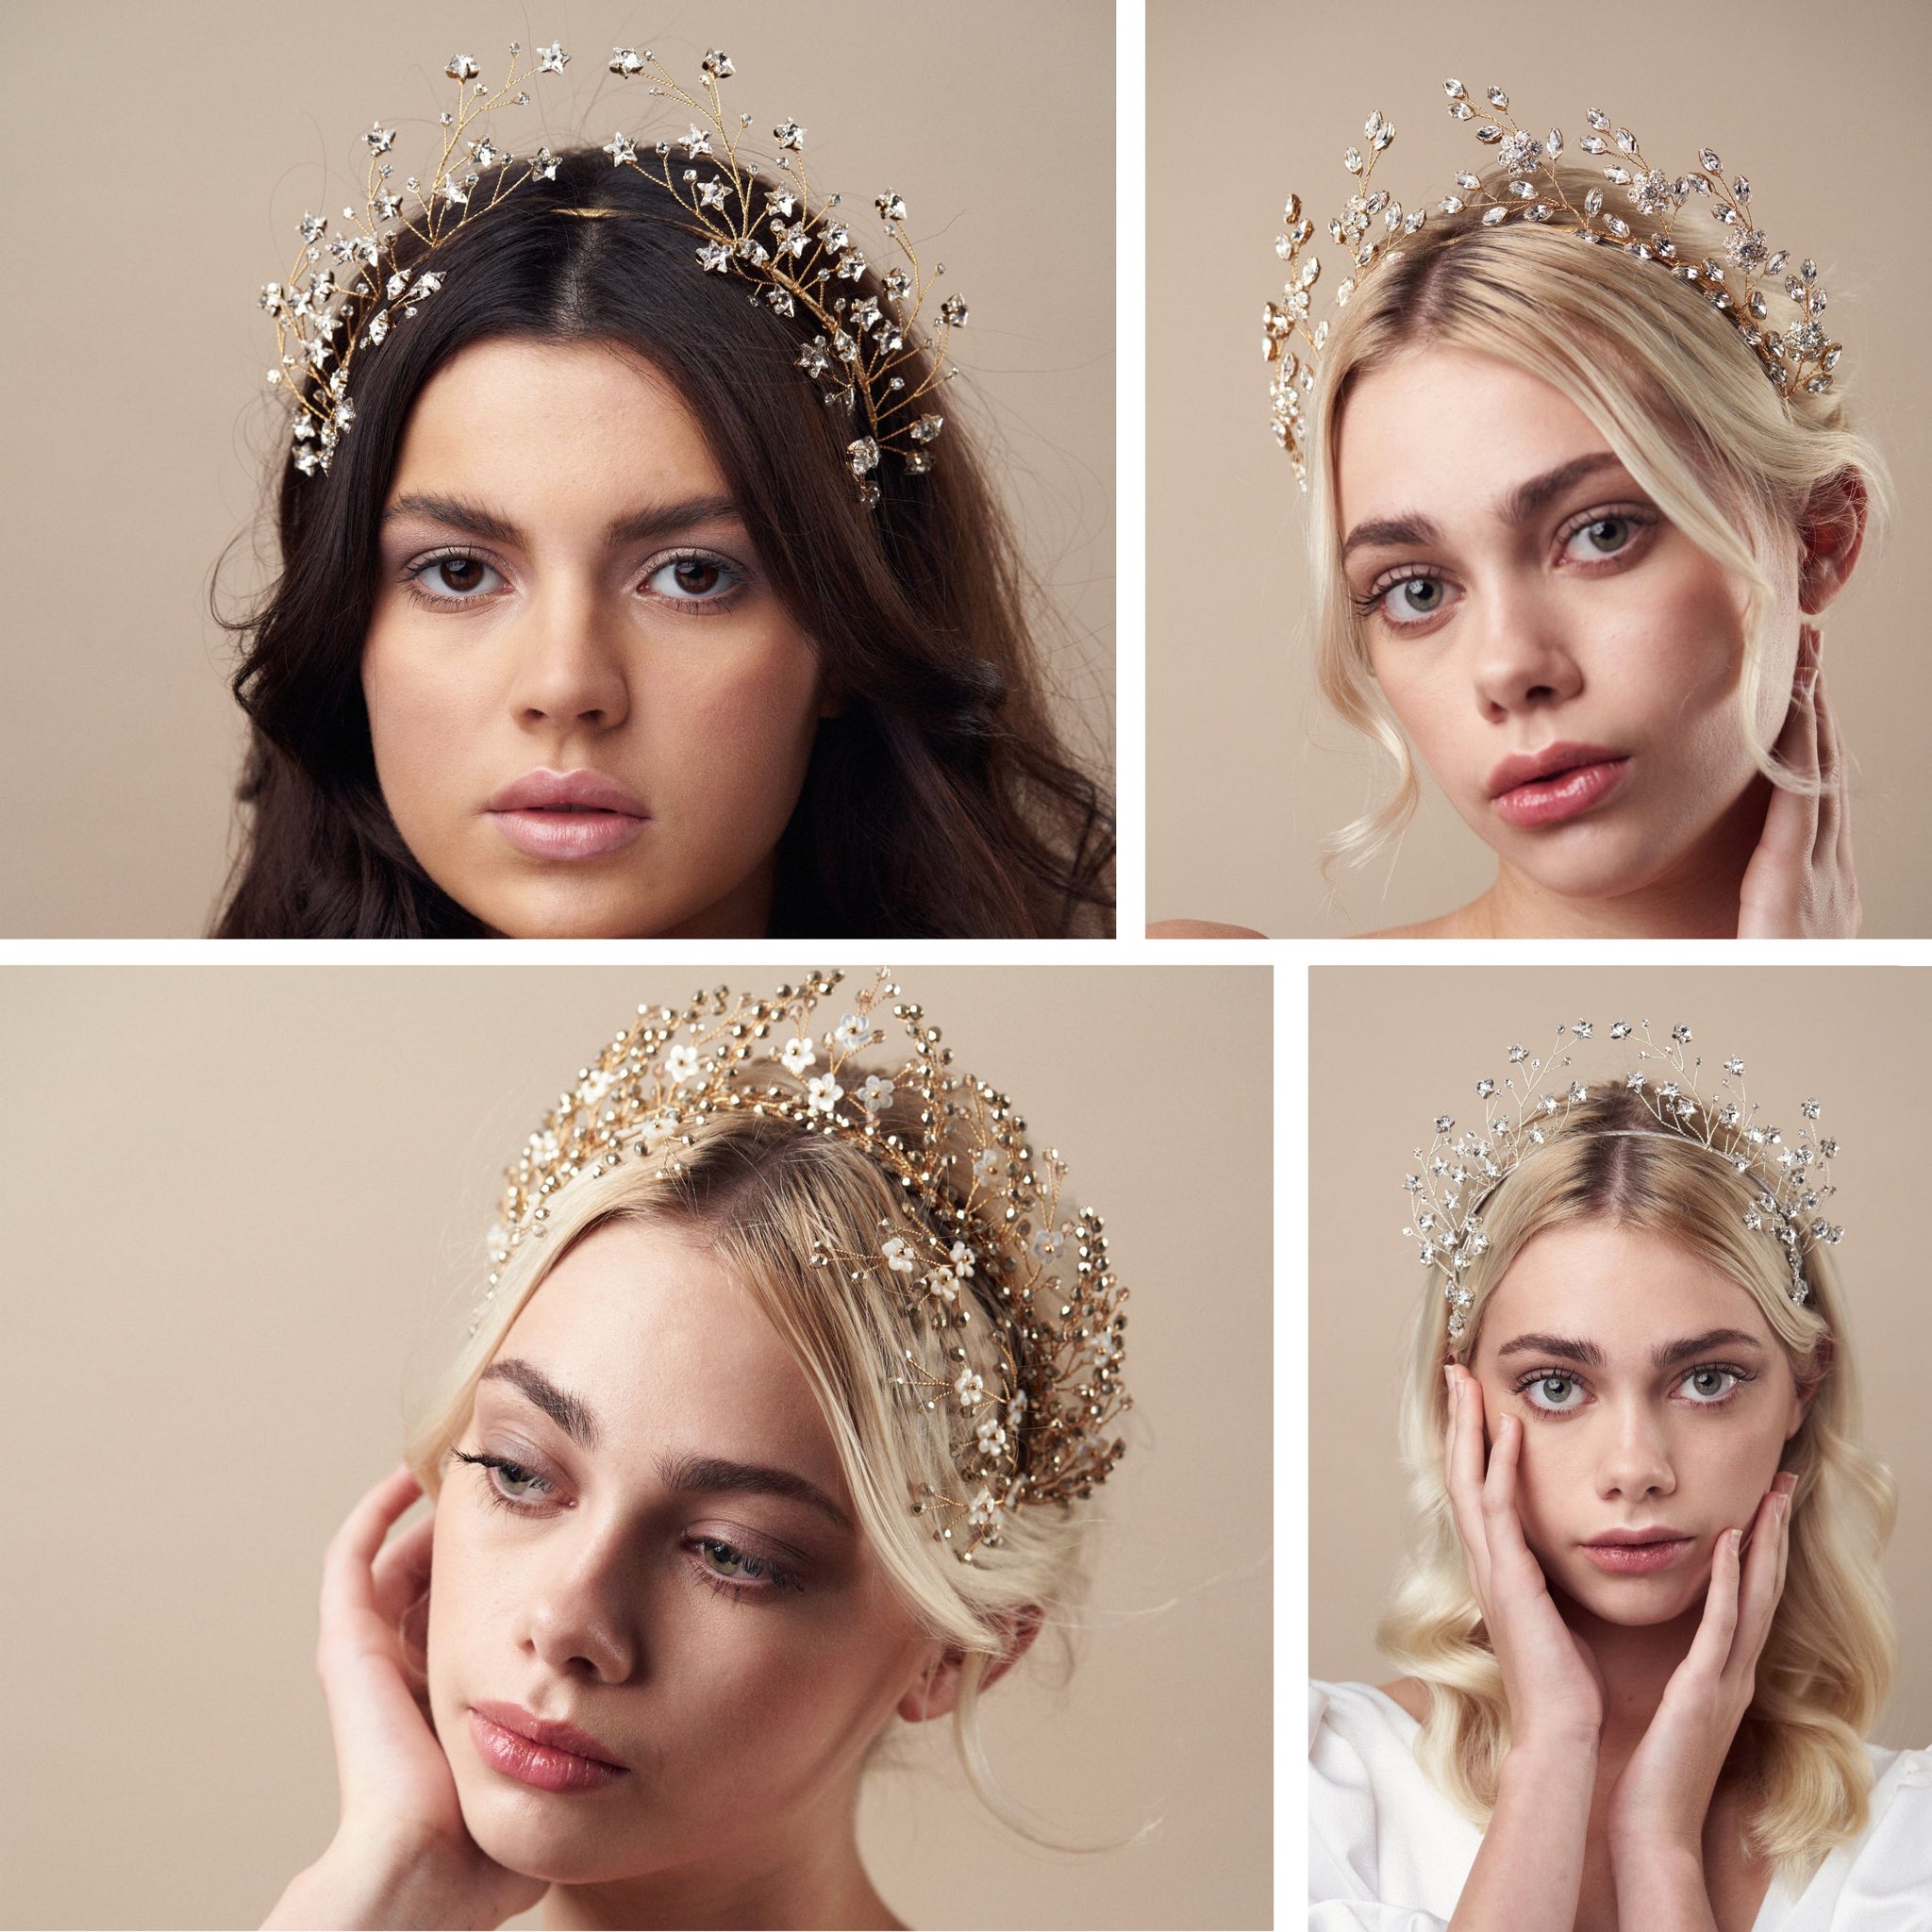 how to choose a wedding crown - four models wearing different wedding crowns in gold and in silver with celestial star designs and gold floral crowns